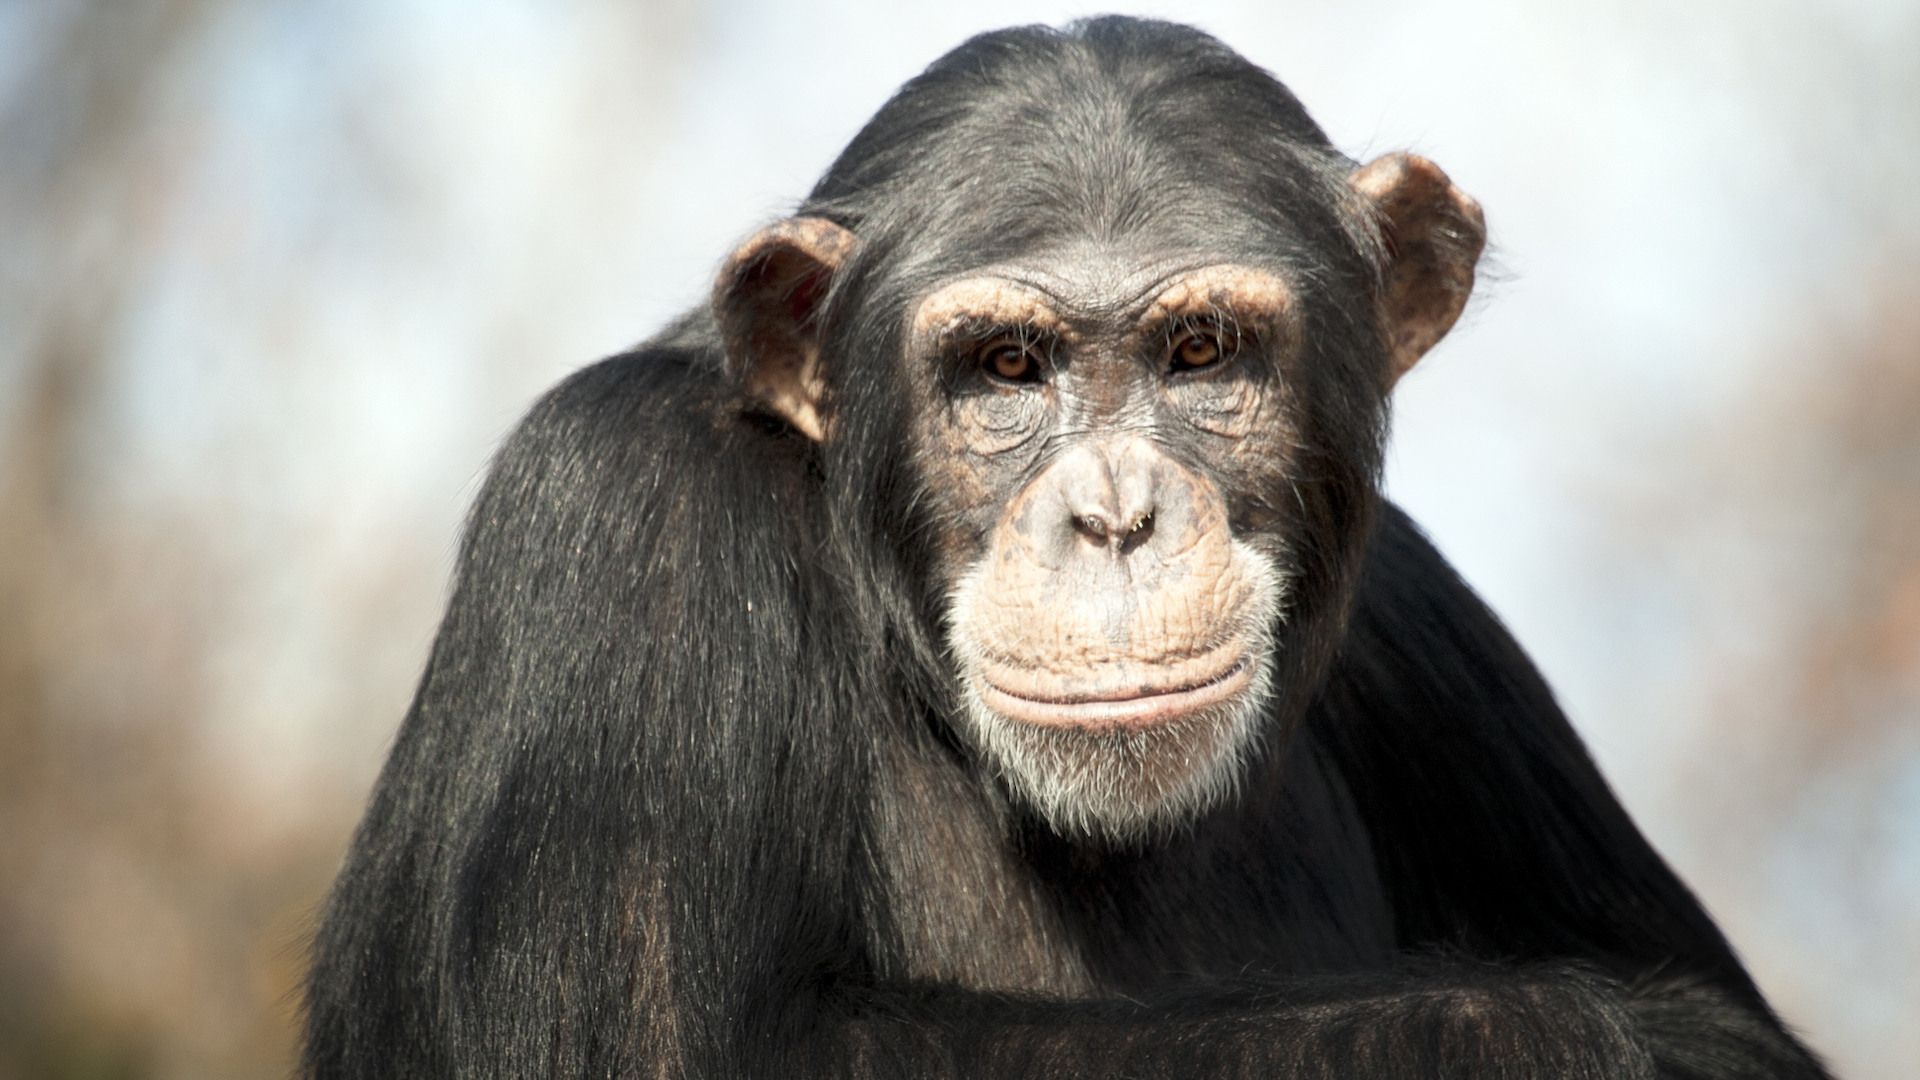 A wise chimp